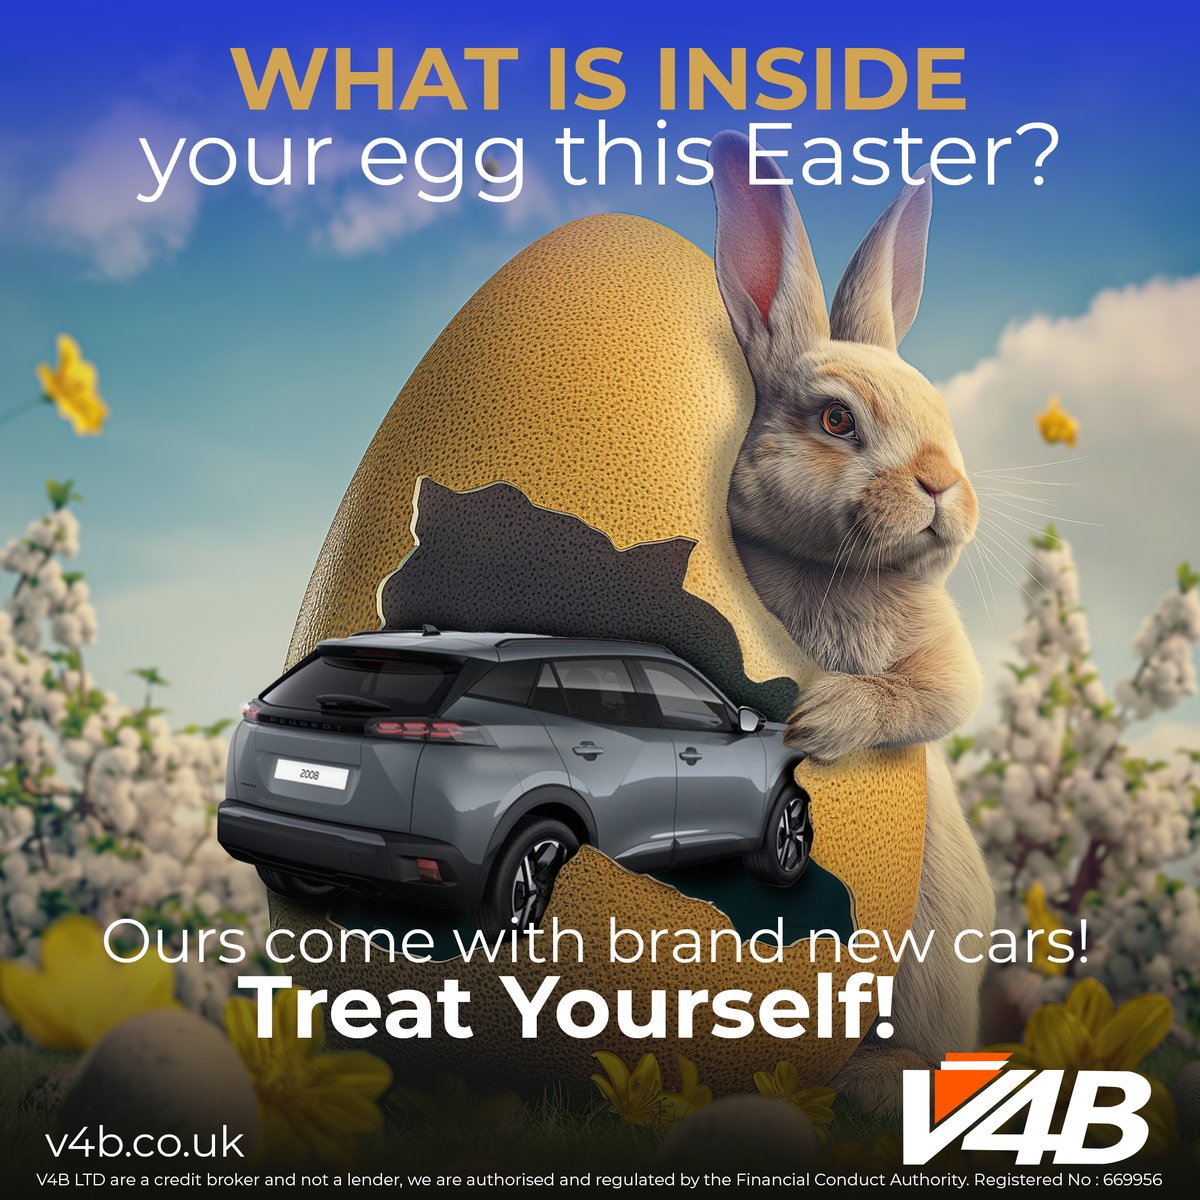 🥚 With V4B, finding your dream car is as delightful as cracking open an Easter egg. 🚗💨 Explore our range of vehicles and let the Easter bunny lead you to your perfect ride. Start your egg-citing journey with V4B today! Happy Easter from V4B! 🐣🚙 #Easter #V4B #carleasing